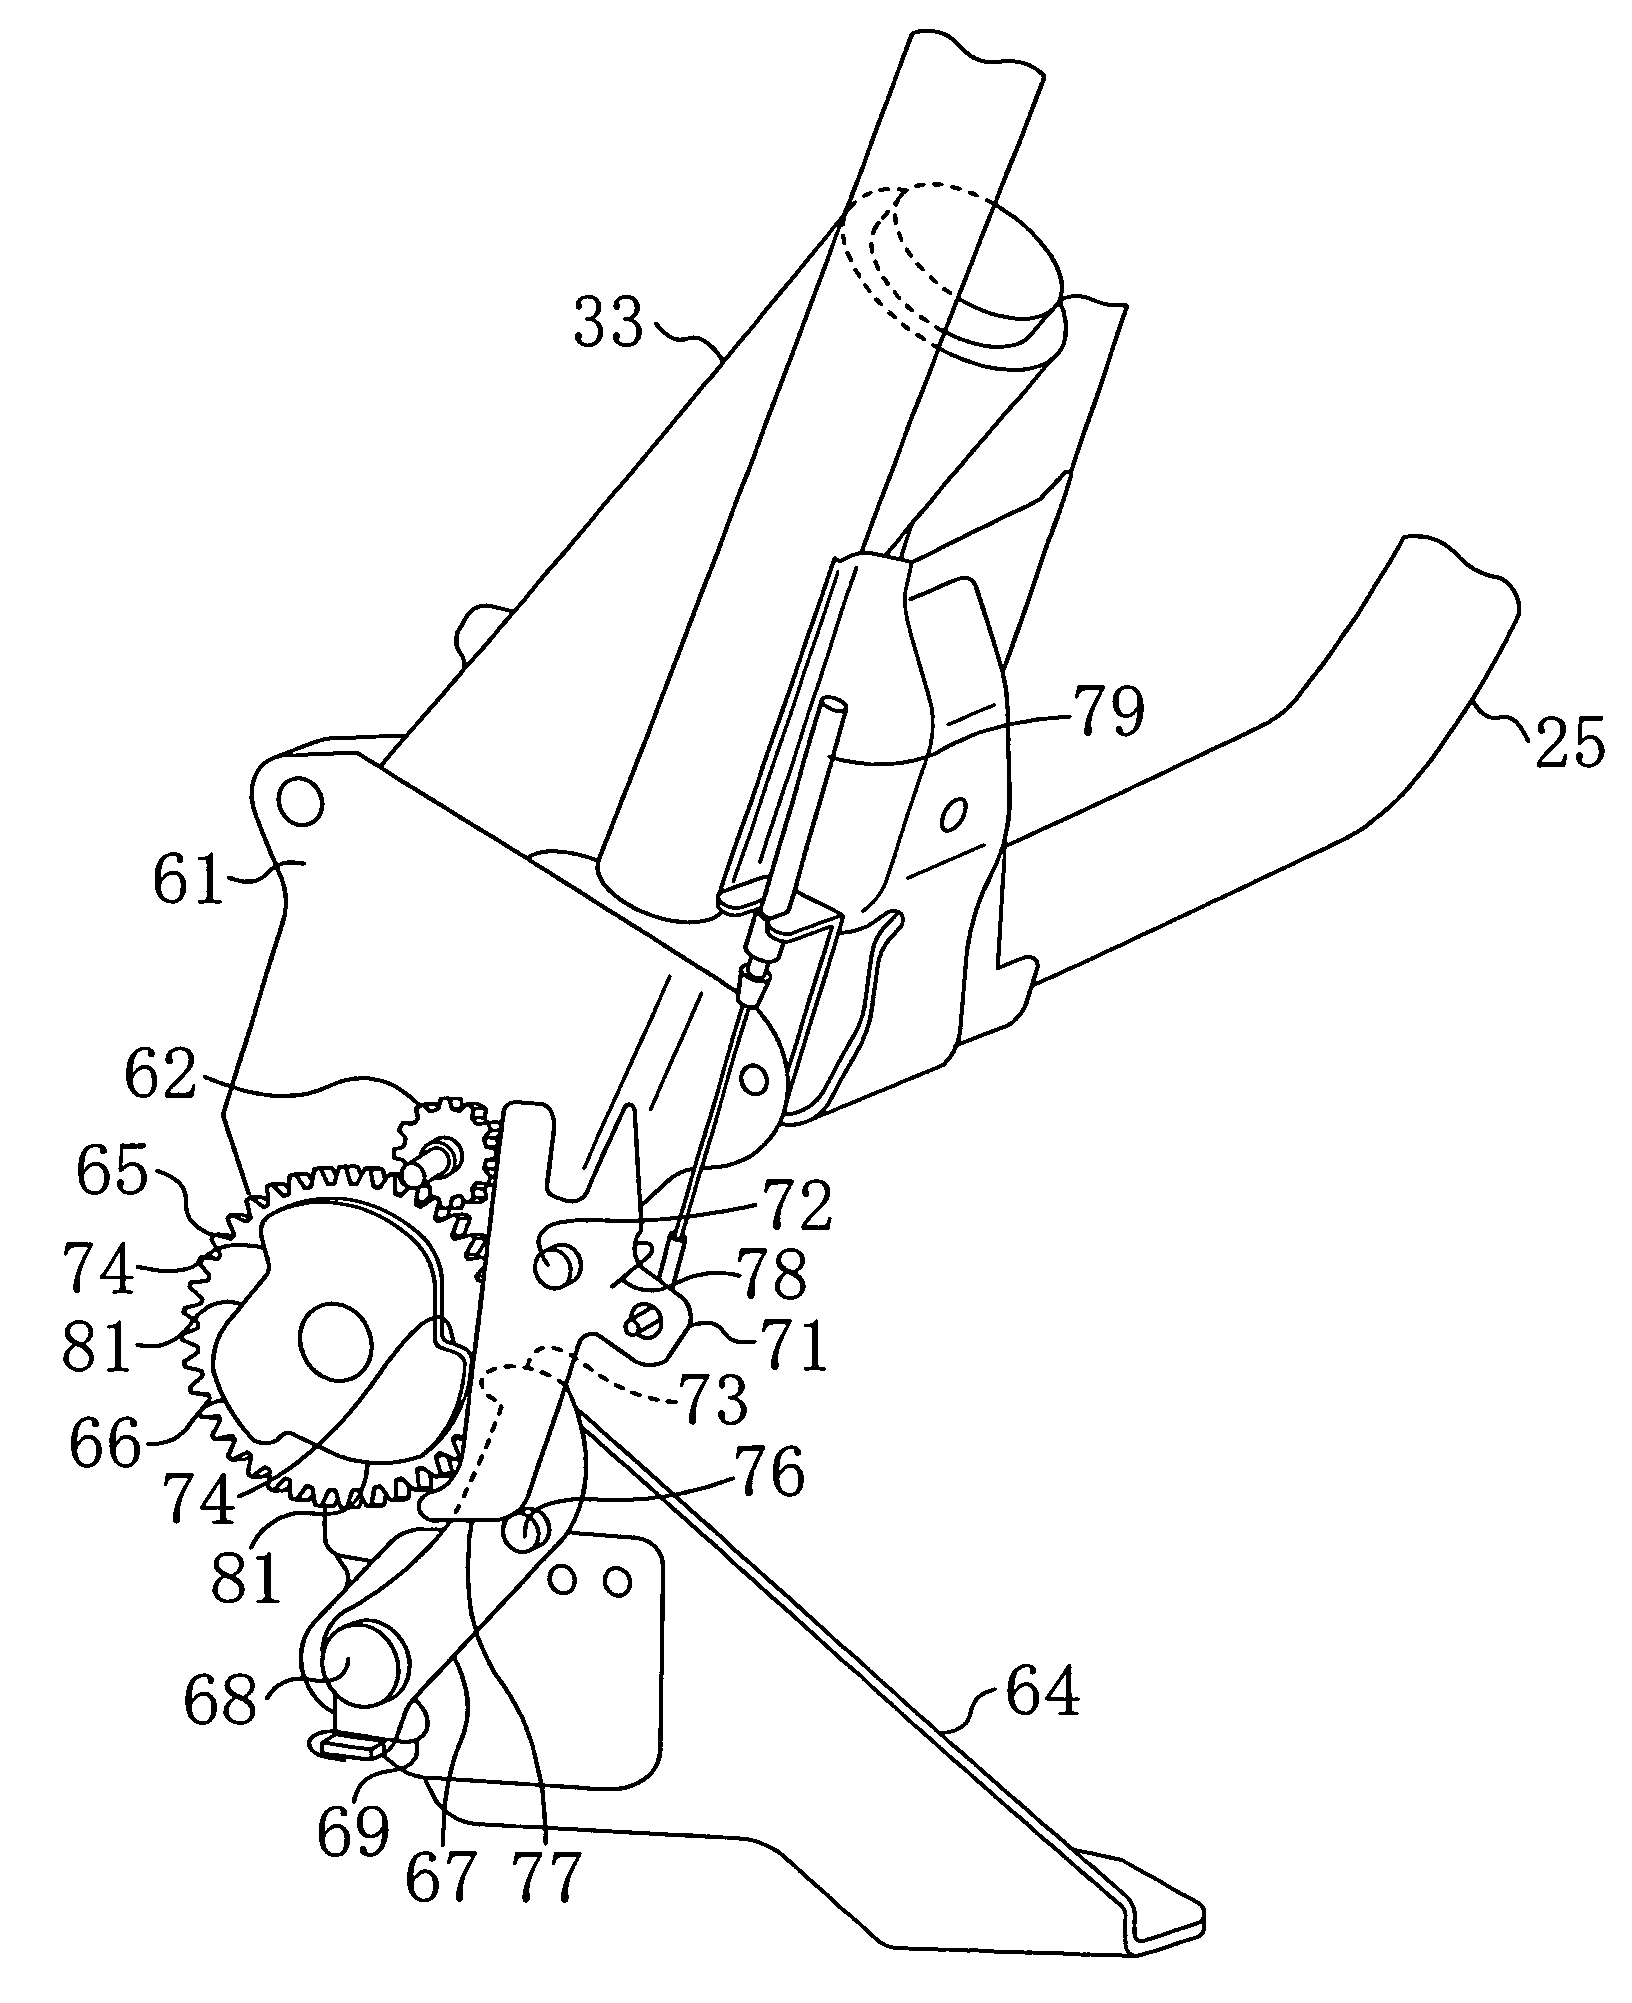 Device for vehicle seat